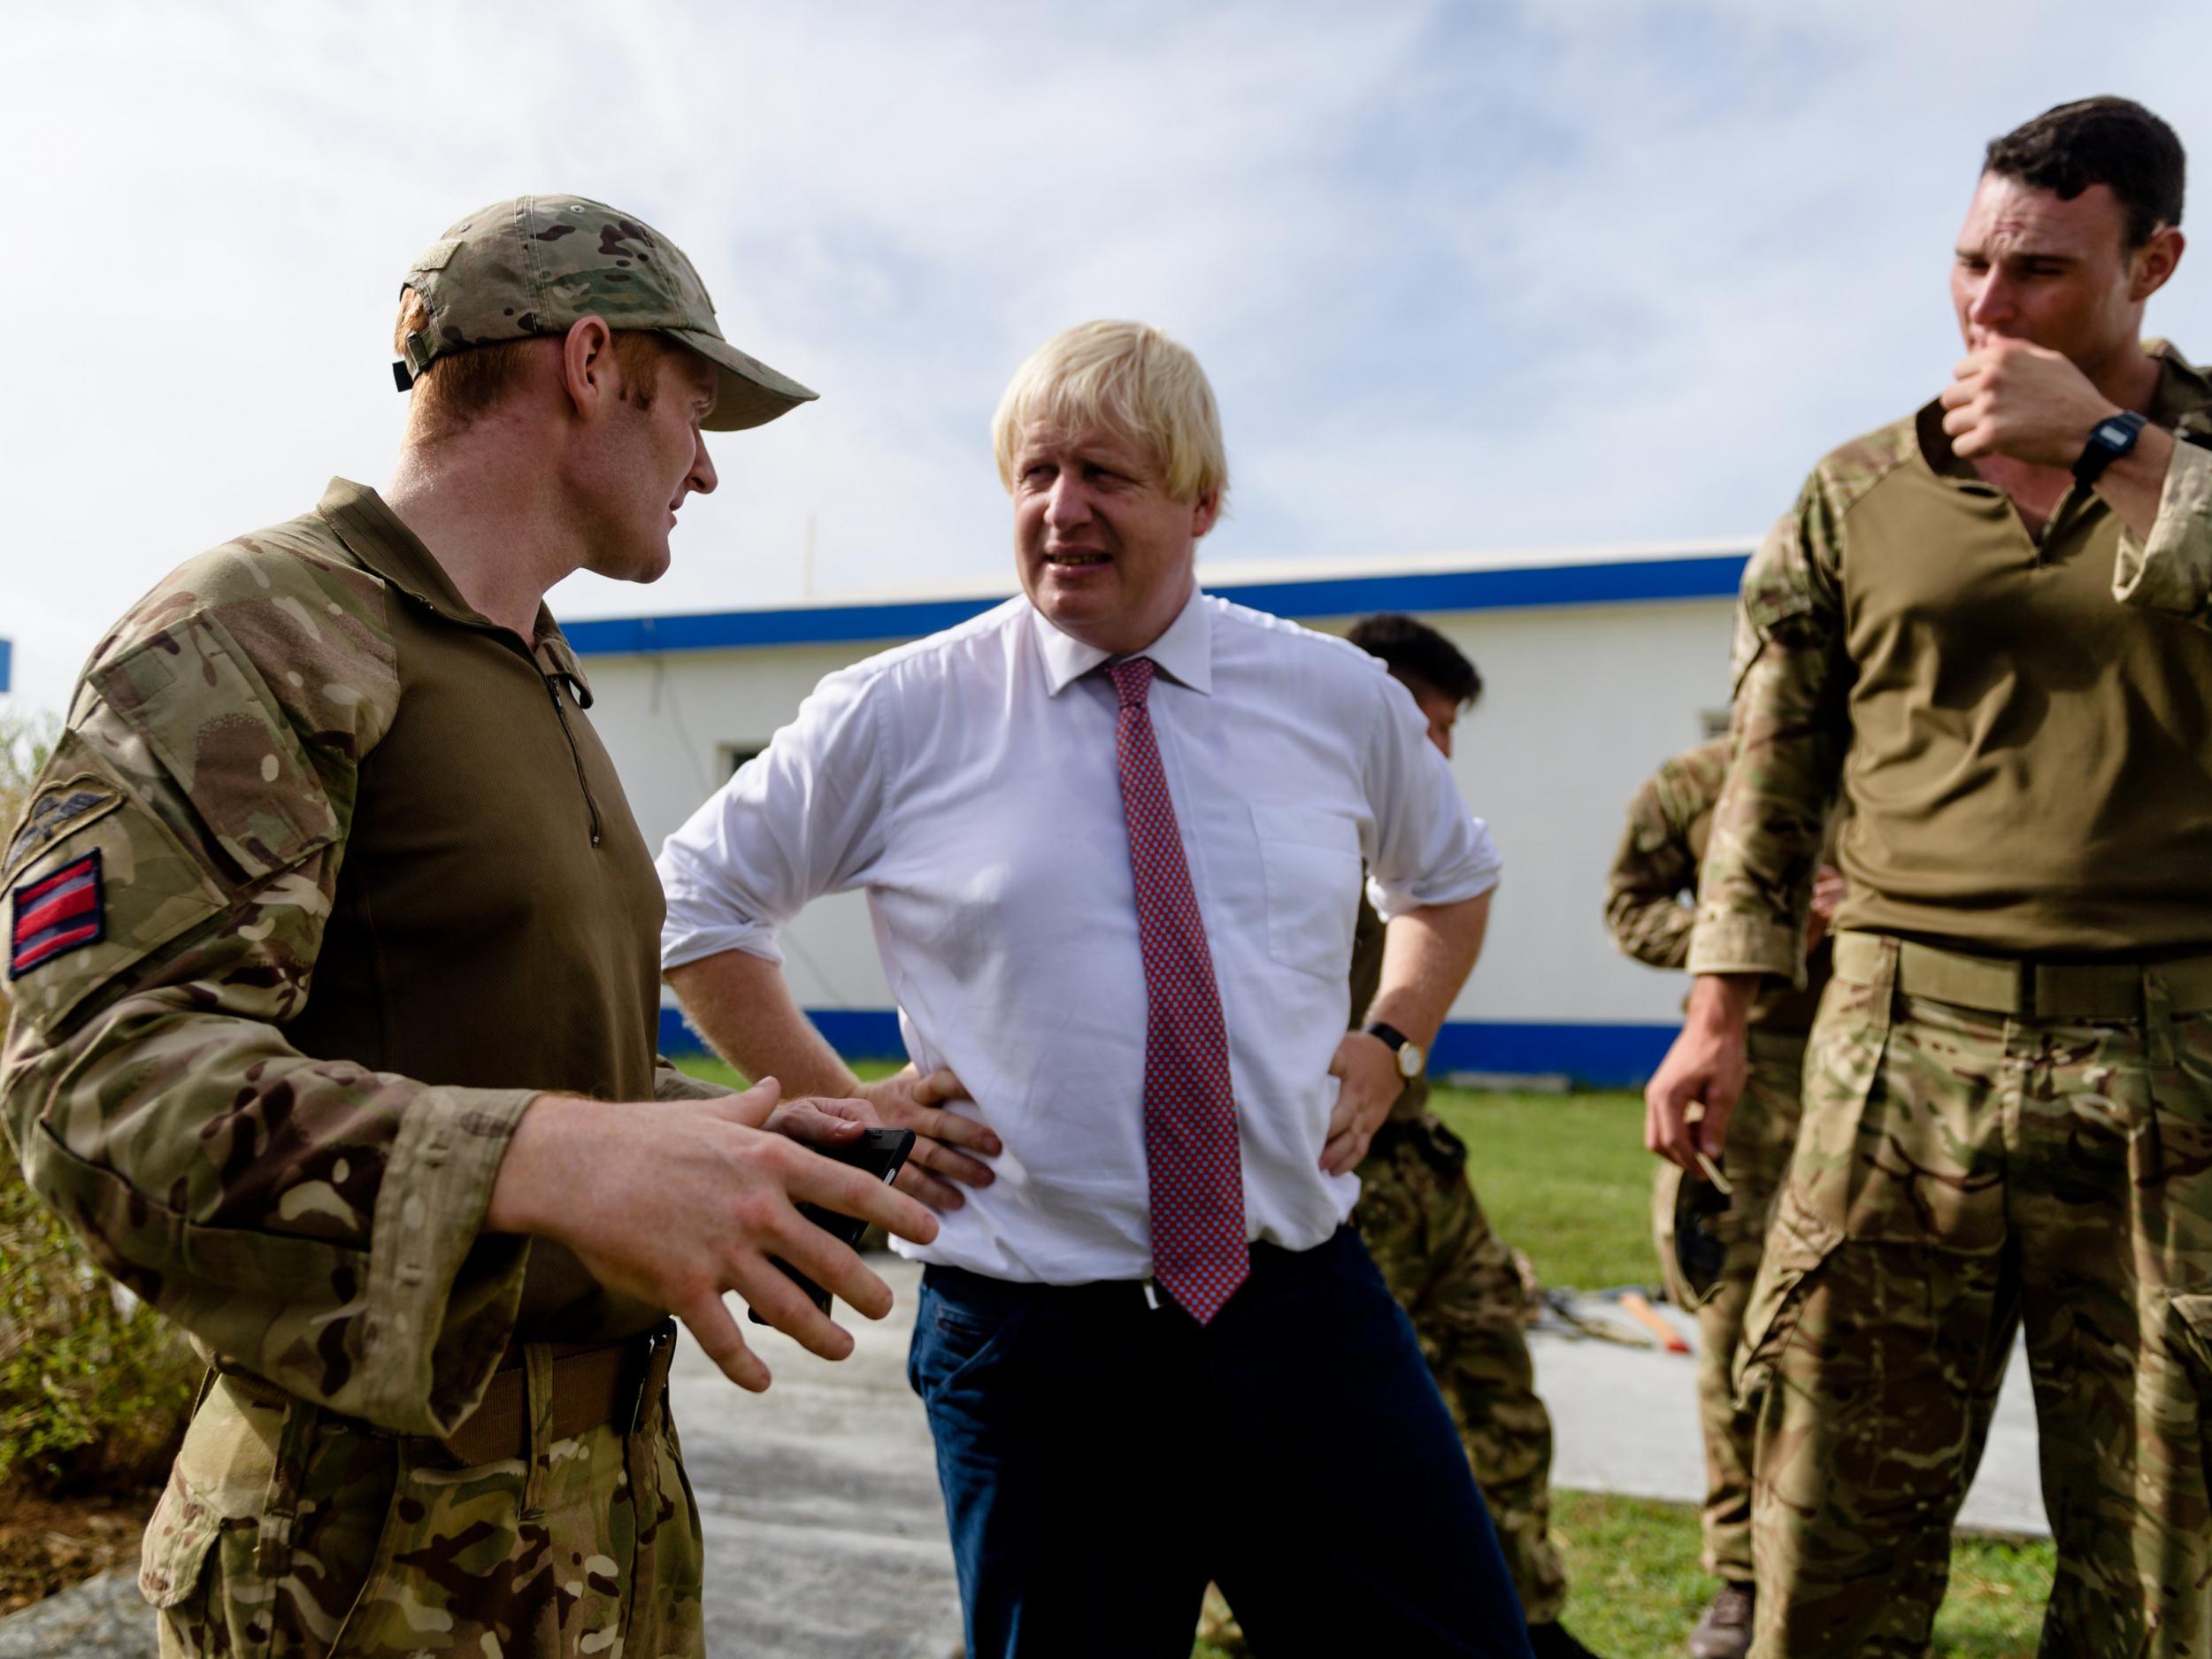 Boris Johnson visited Anguilla on Wednesday to see first-hand the devastation wreaked by Hurricane Irma